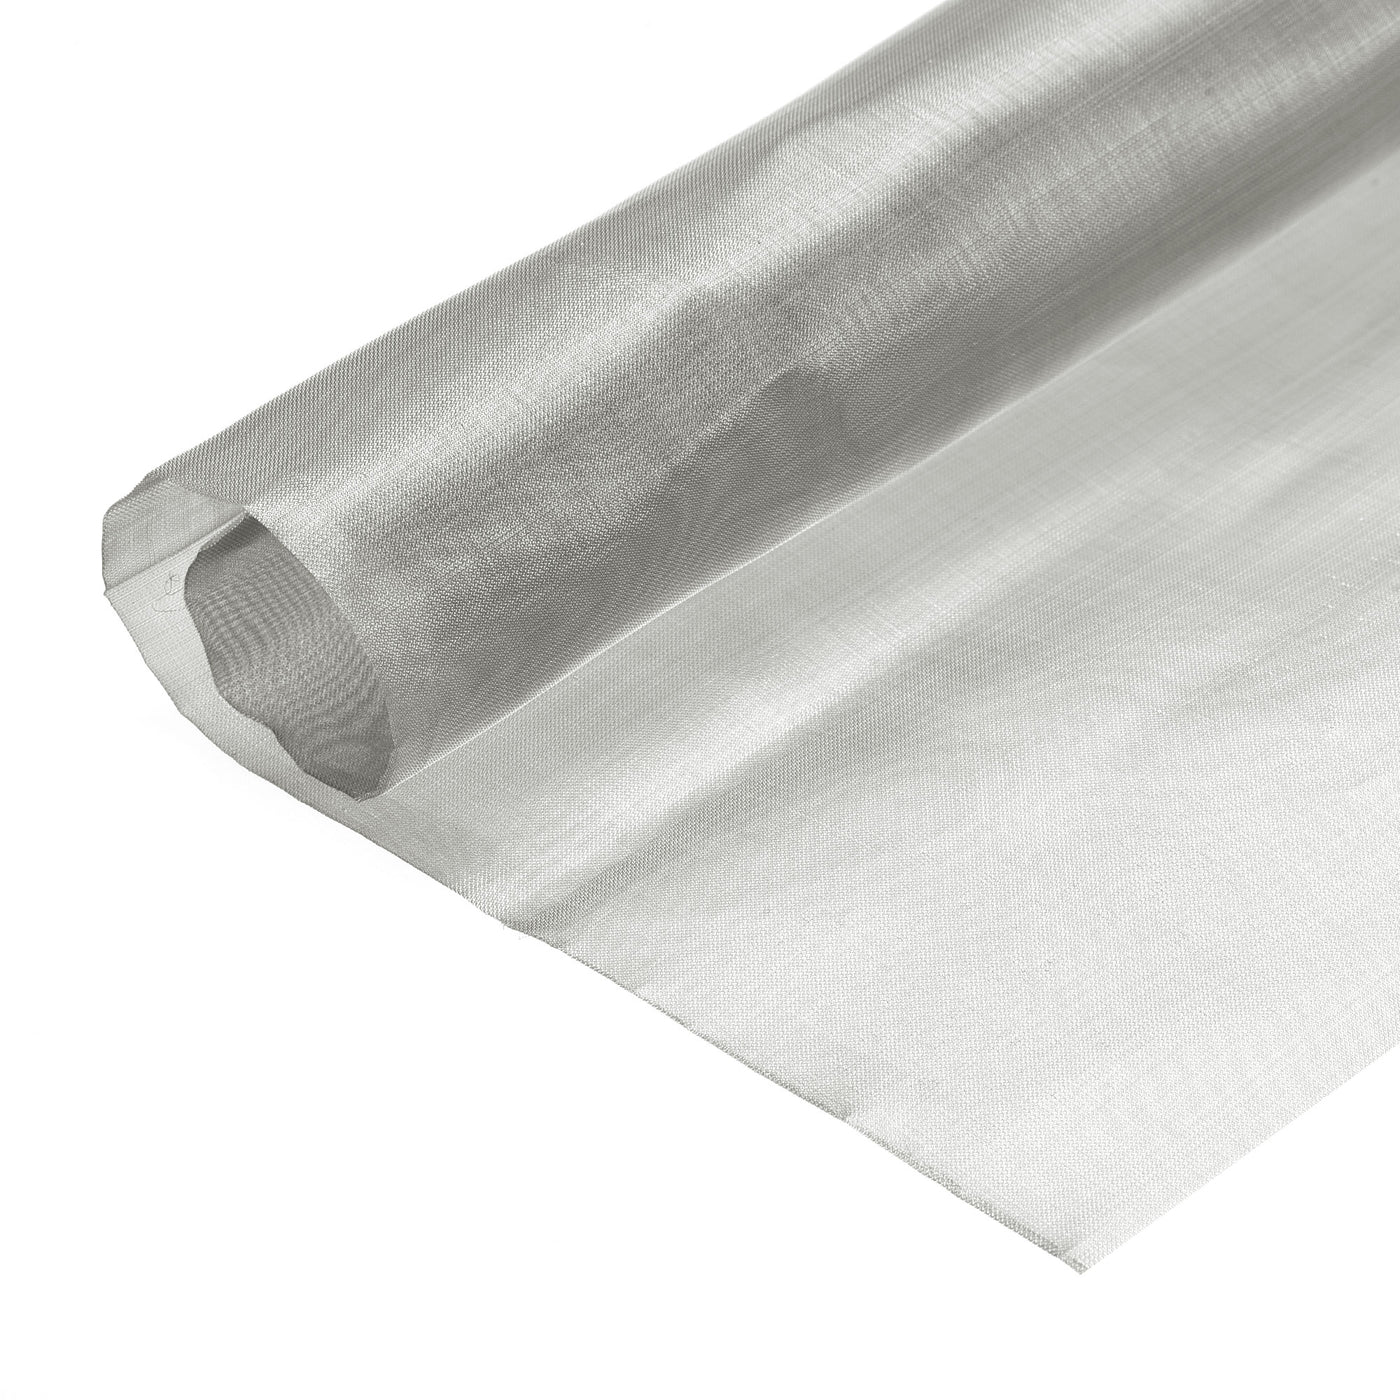 uxcell Uxcell Woven Wire Mesh 12.6"x11.8" 320x300mm, 200 Mesh 304 Stainless Steel Filter Screen Sheet, for Computer Cooling Fan Air Ventilation Cabinet